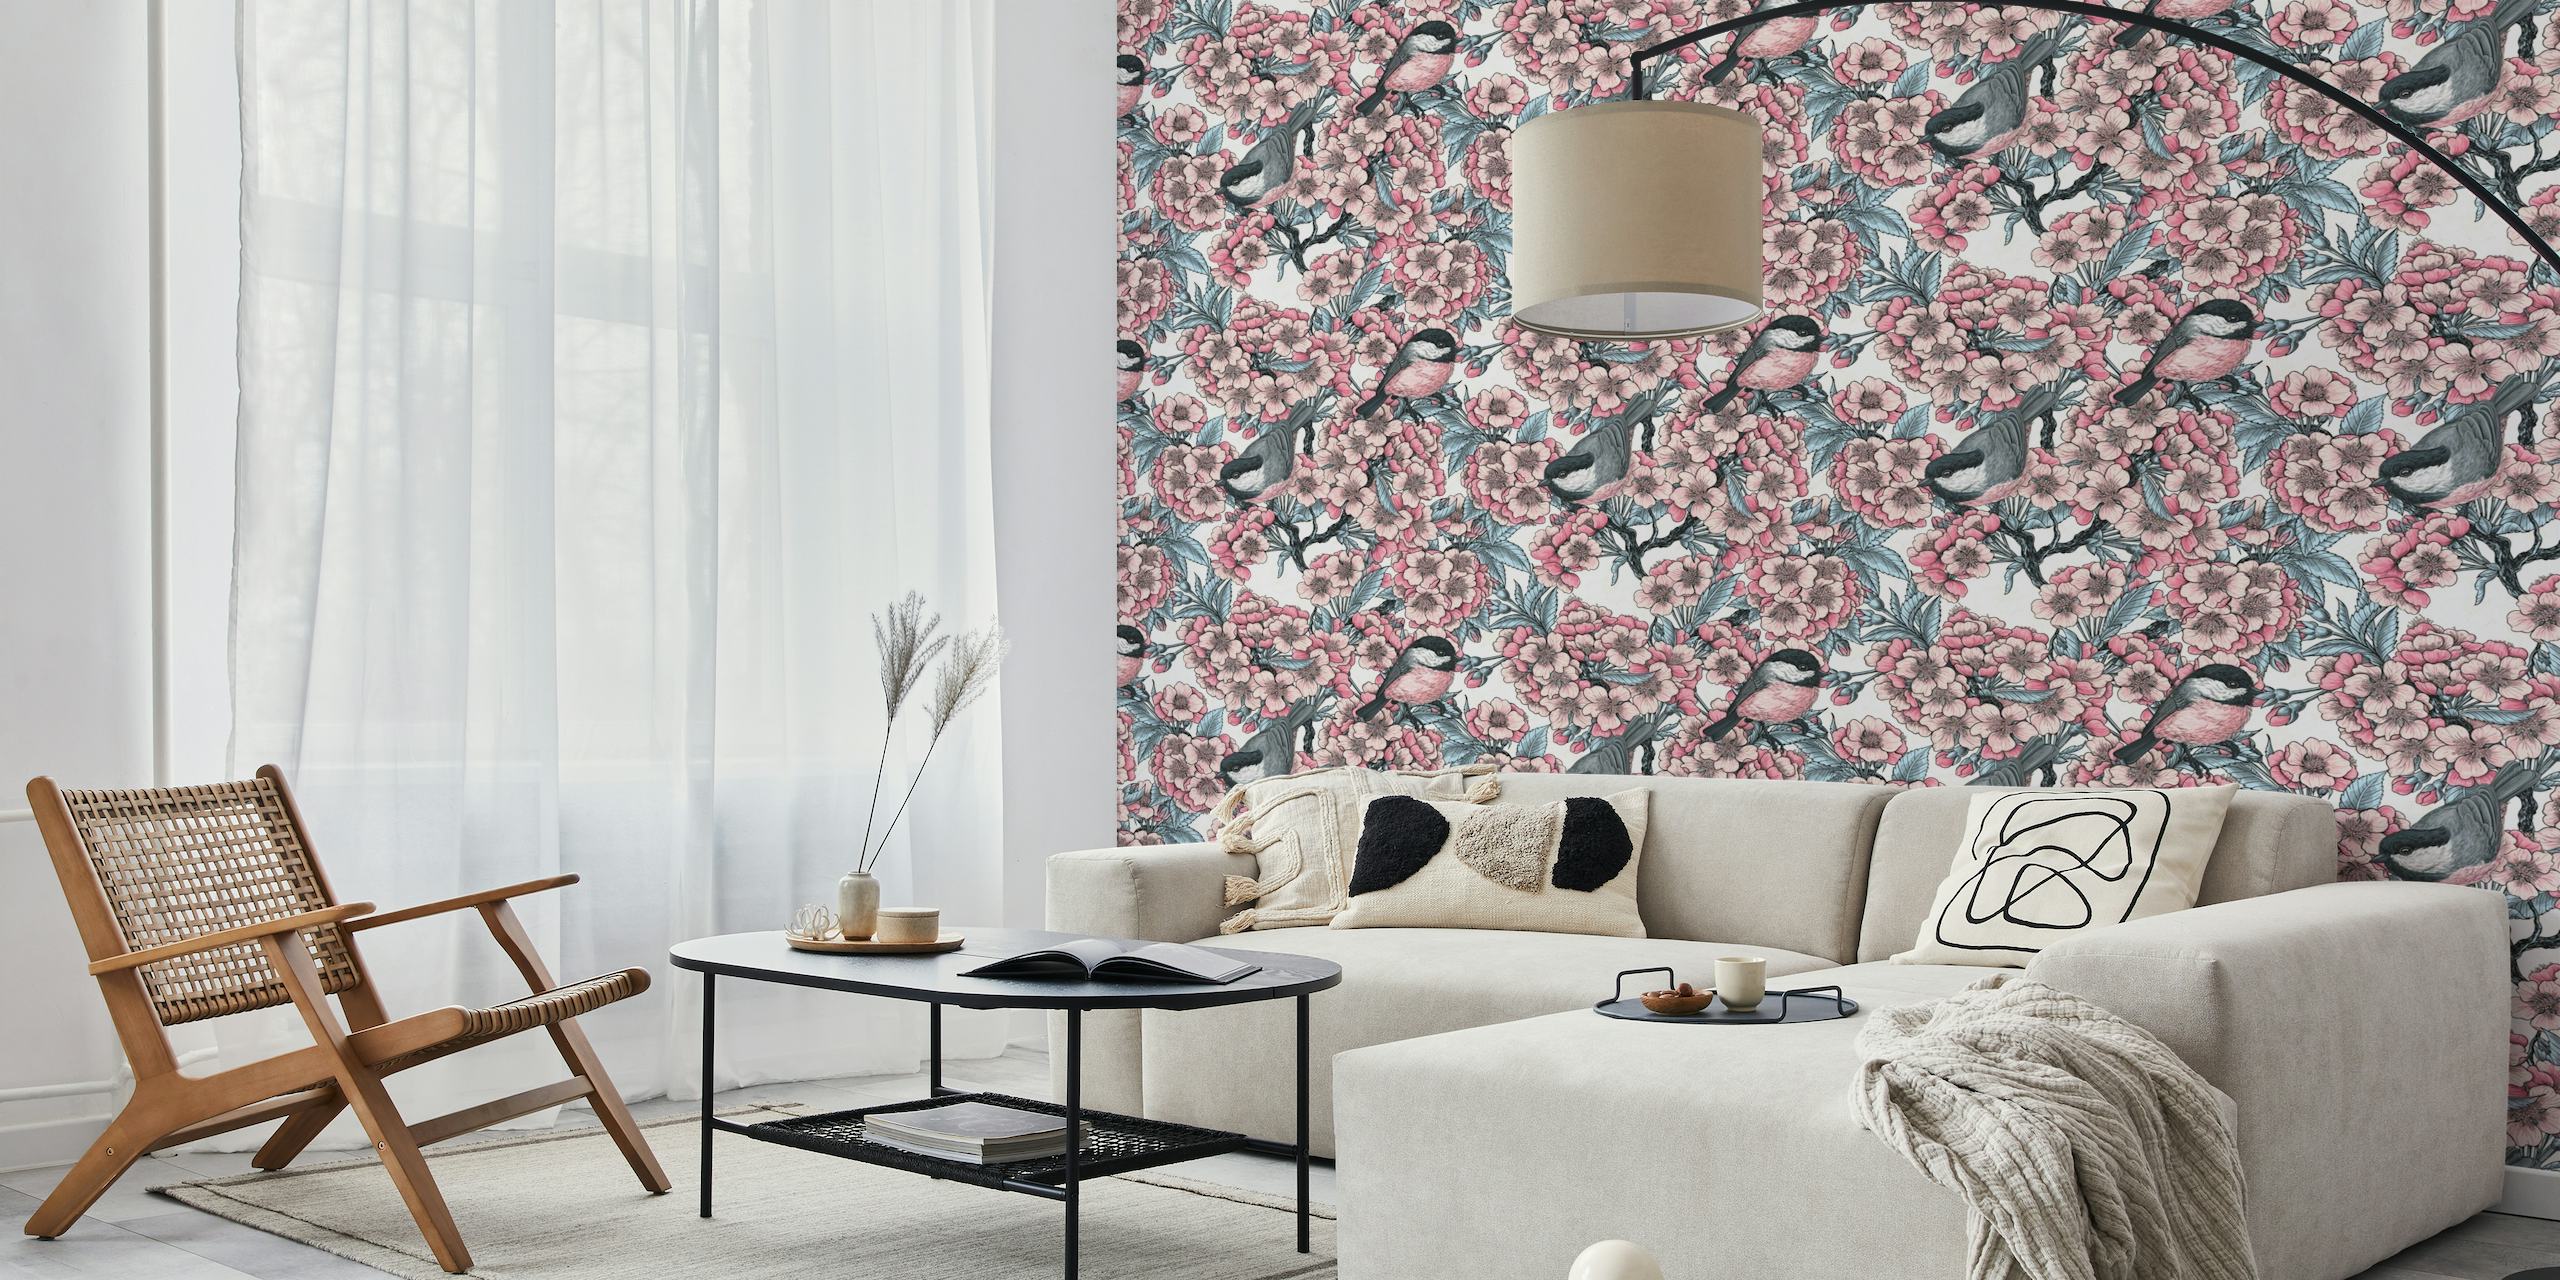 Cherry blossom and birds on white wallpaper